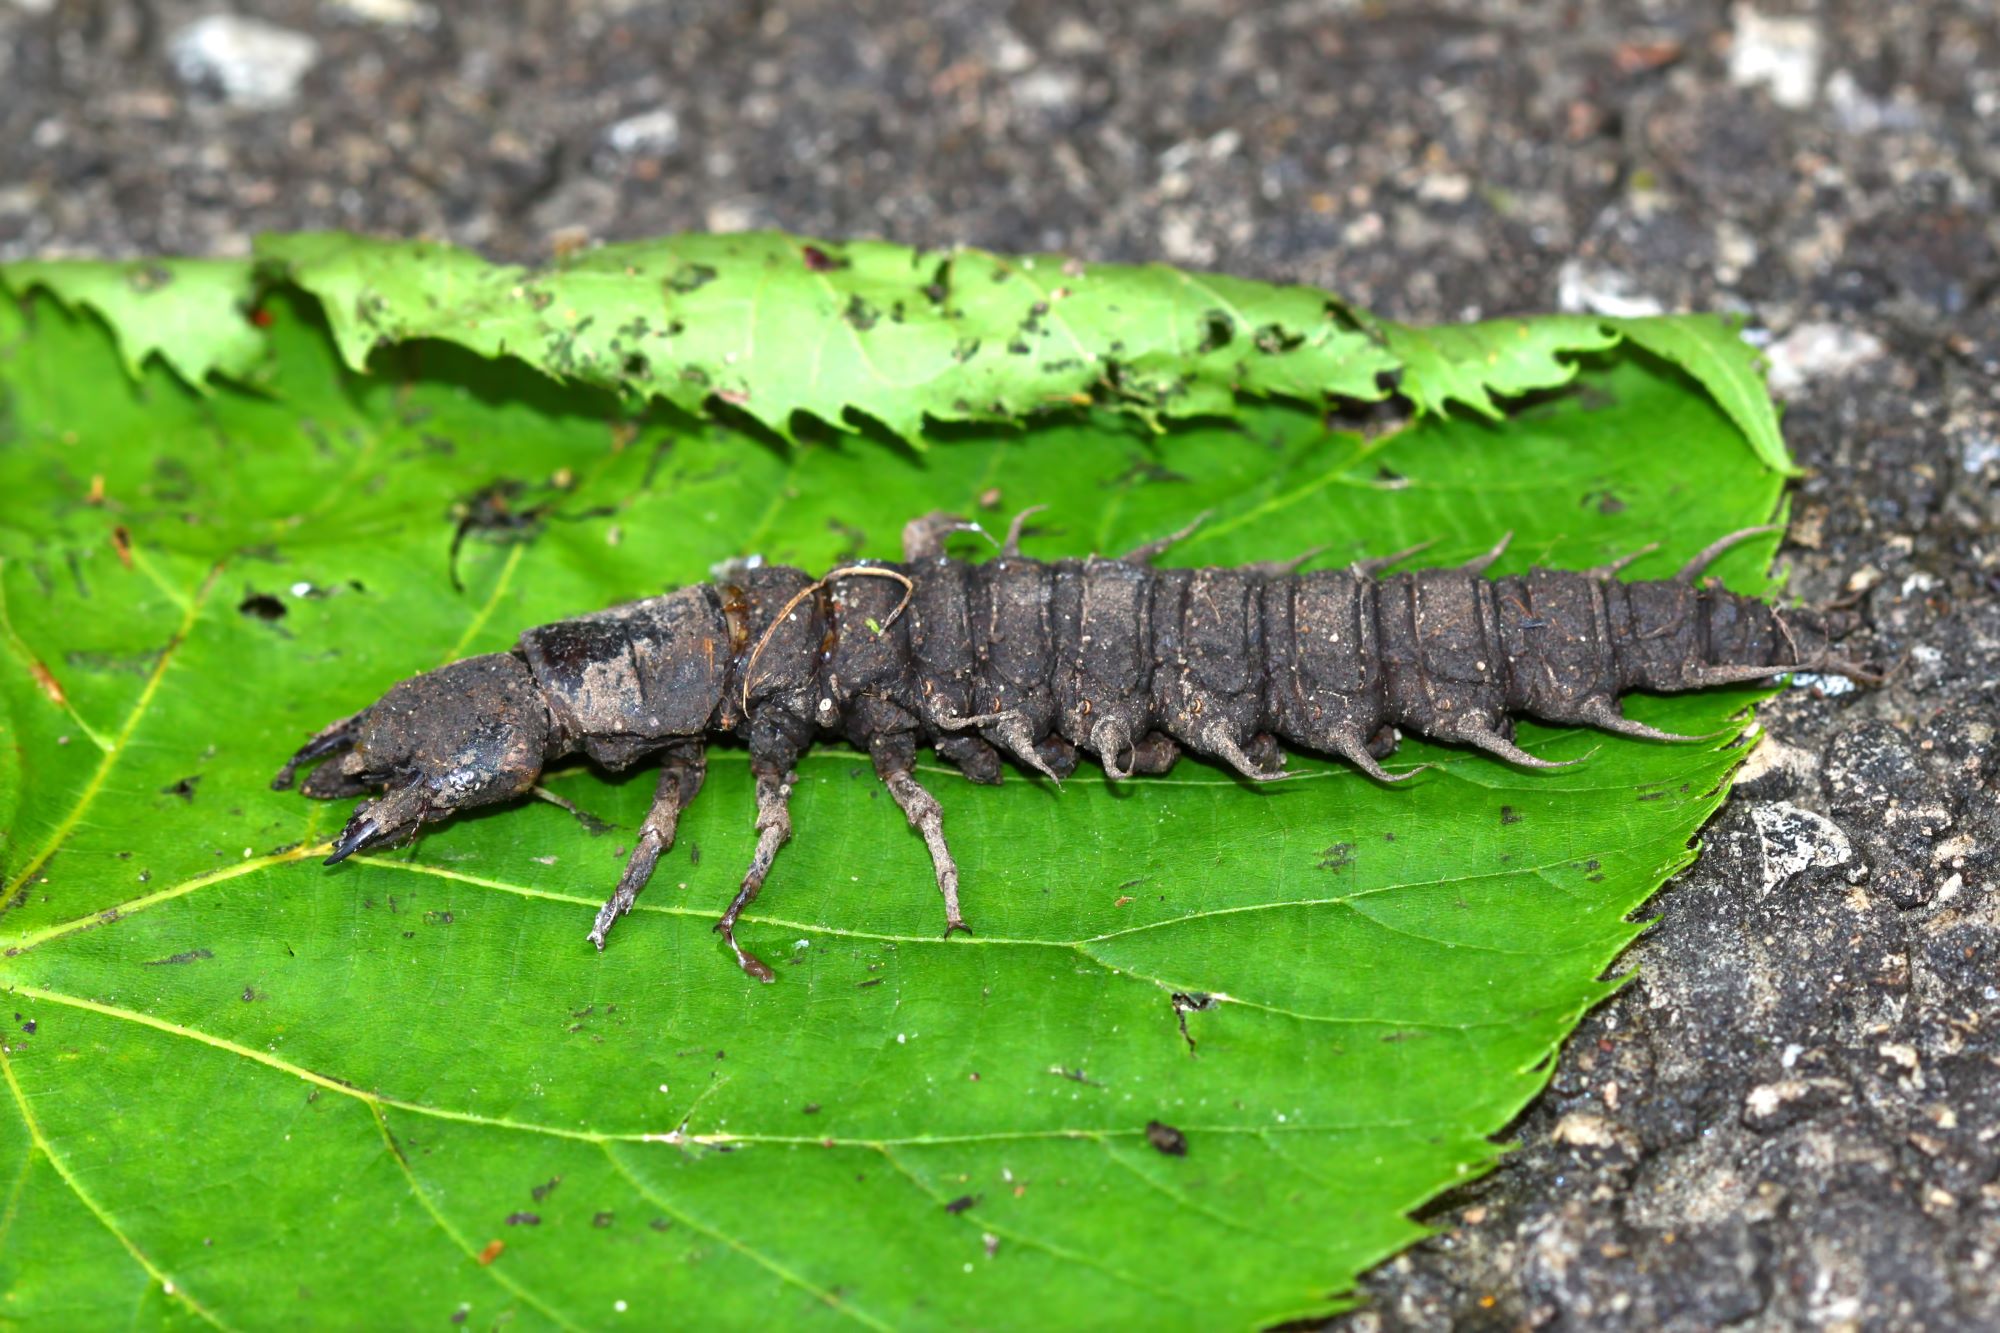 a dobsonfly larva also known as a helgrammite